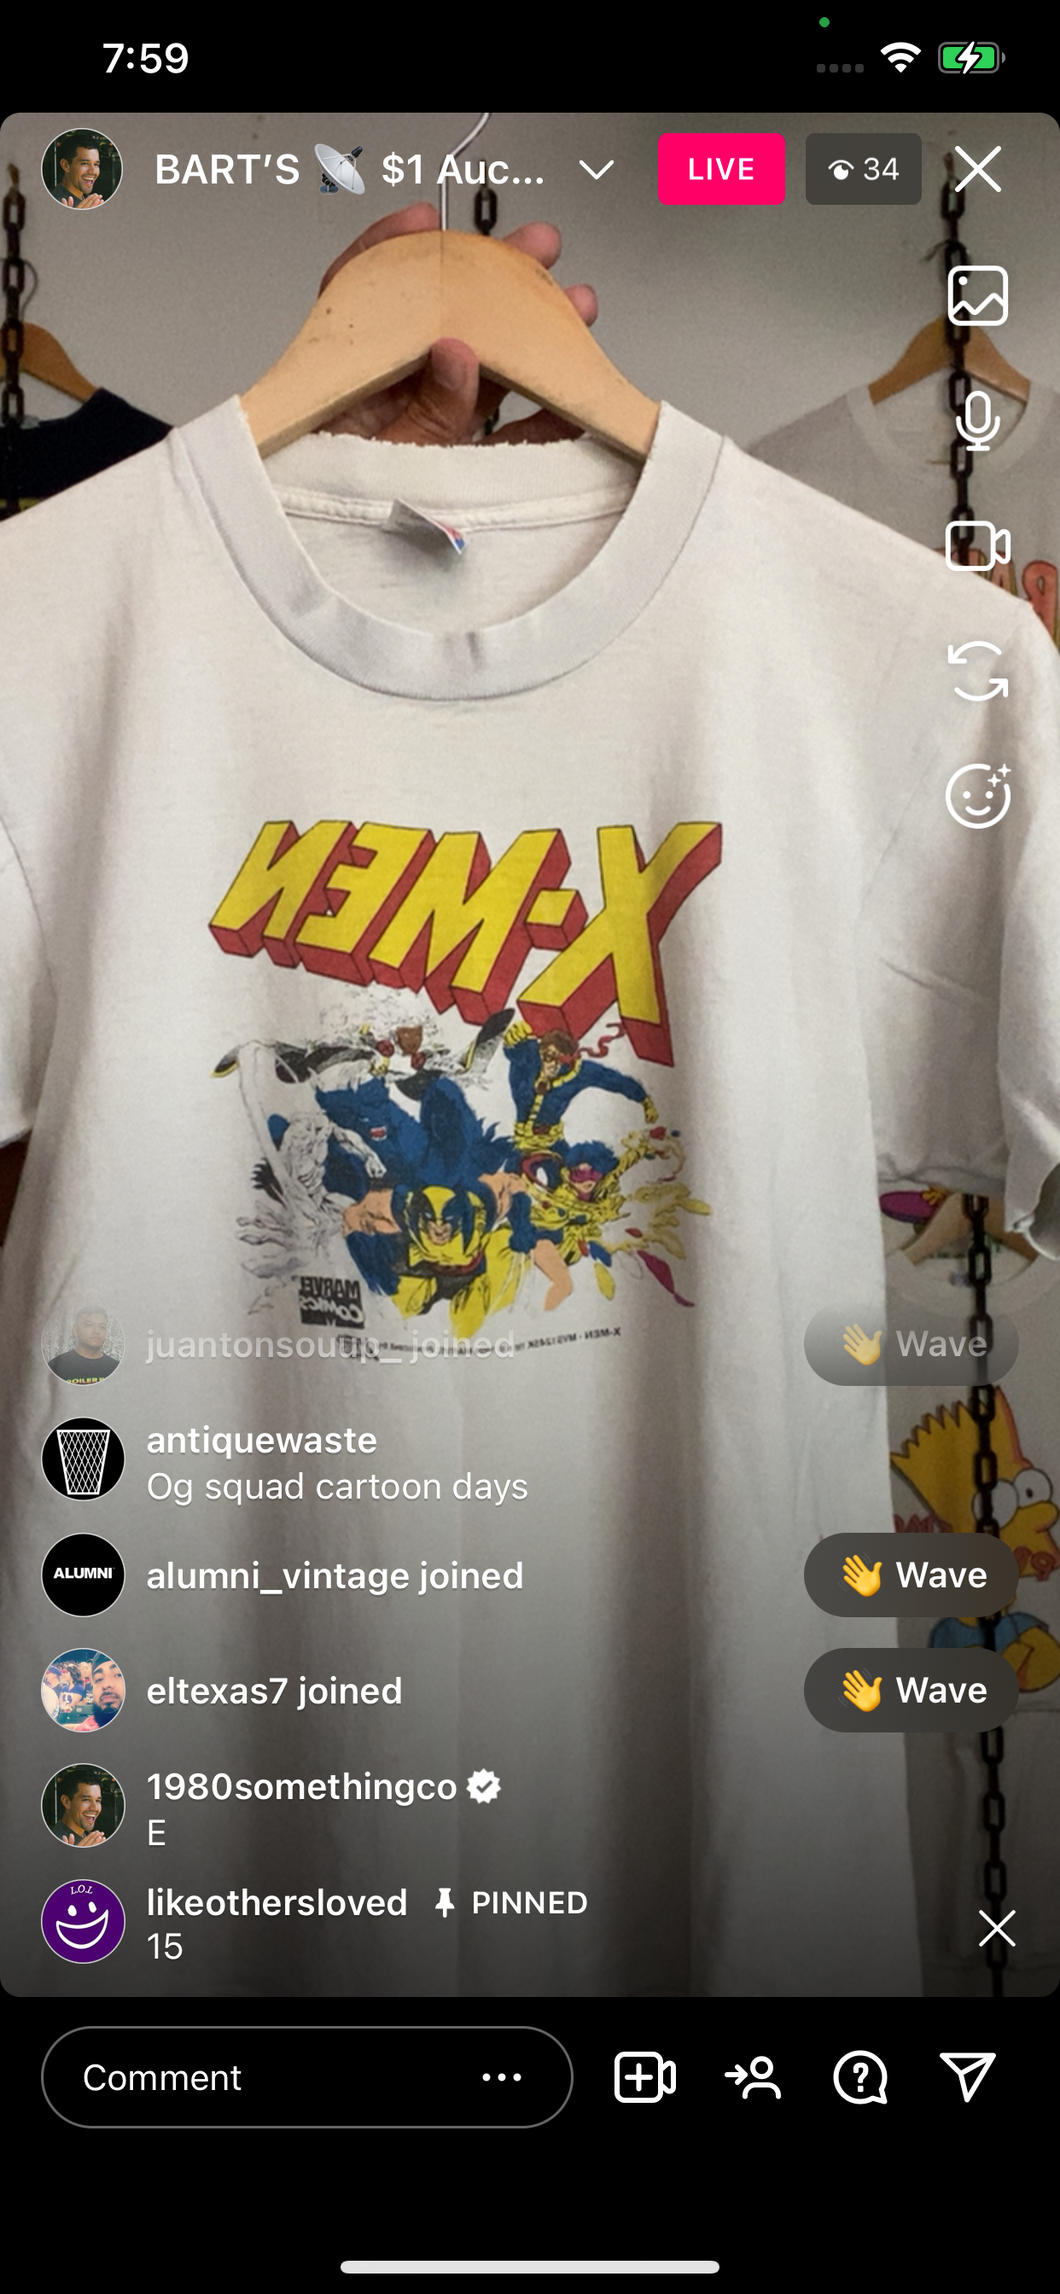 Youth X Men shirt (secondhand)